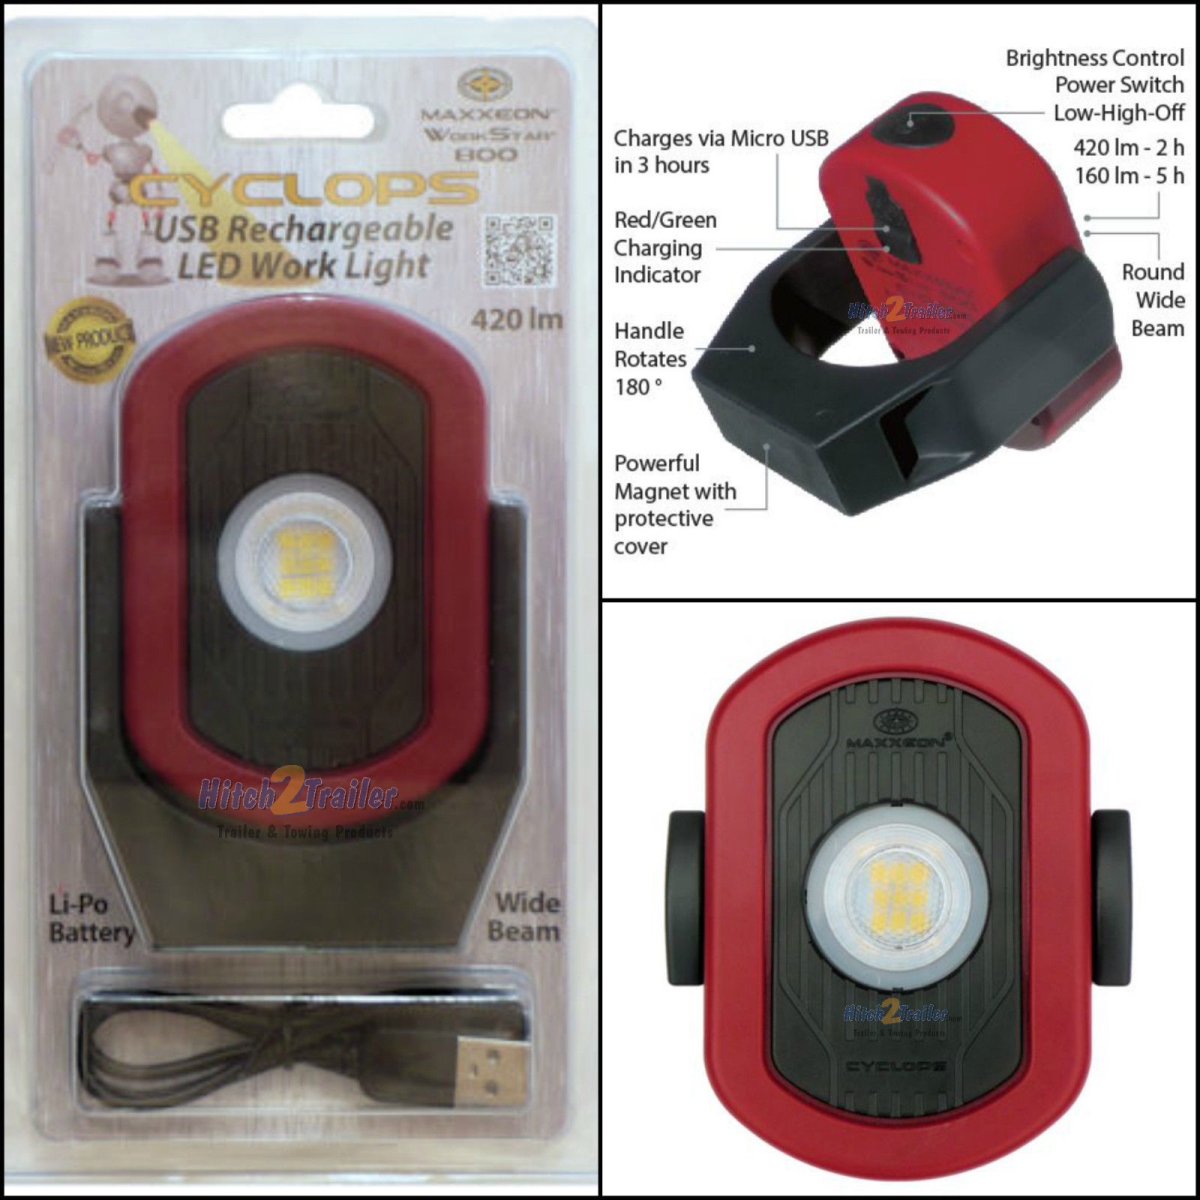 Picture of Maxxeon MNMXN00810 420 Lumen Cyclops USB Rechargeable LED Work Light